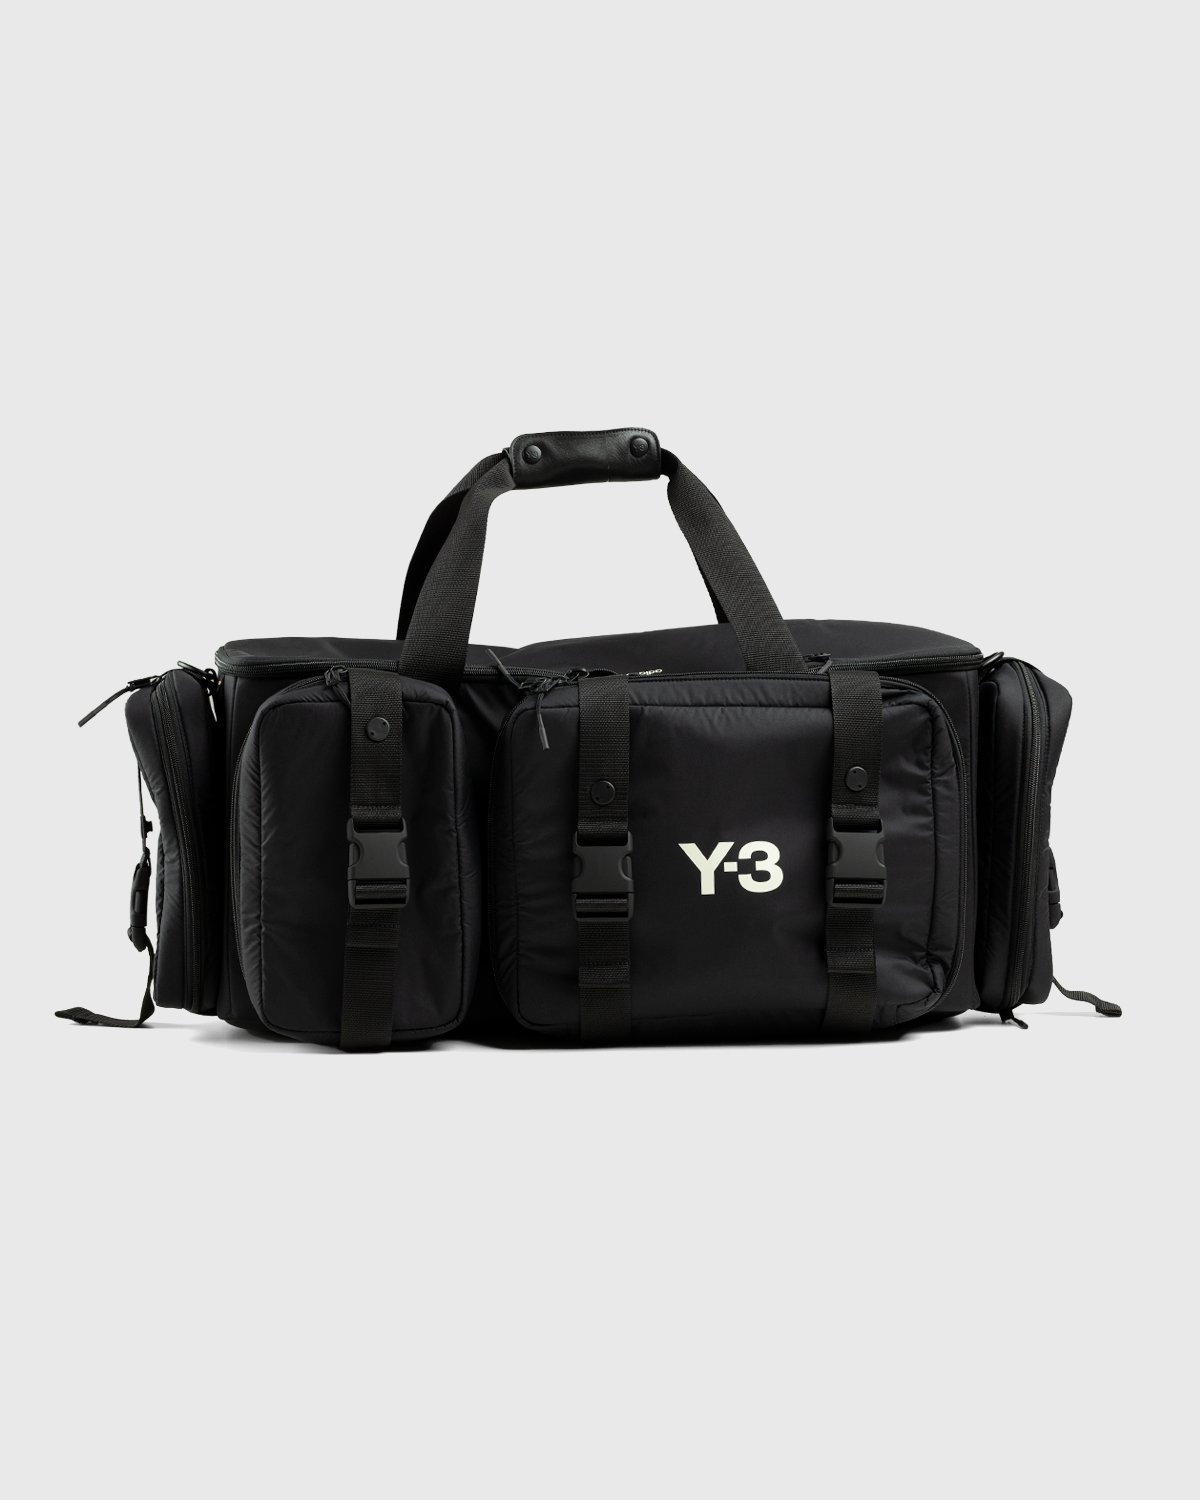 Y-3 - Mobile Archive Hold-All Duffle Bag Black - Accessories - Black - Image 1